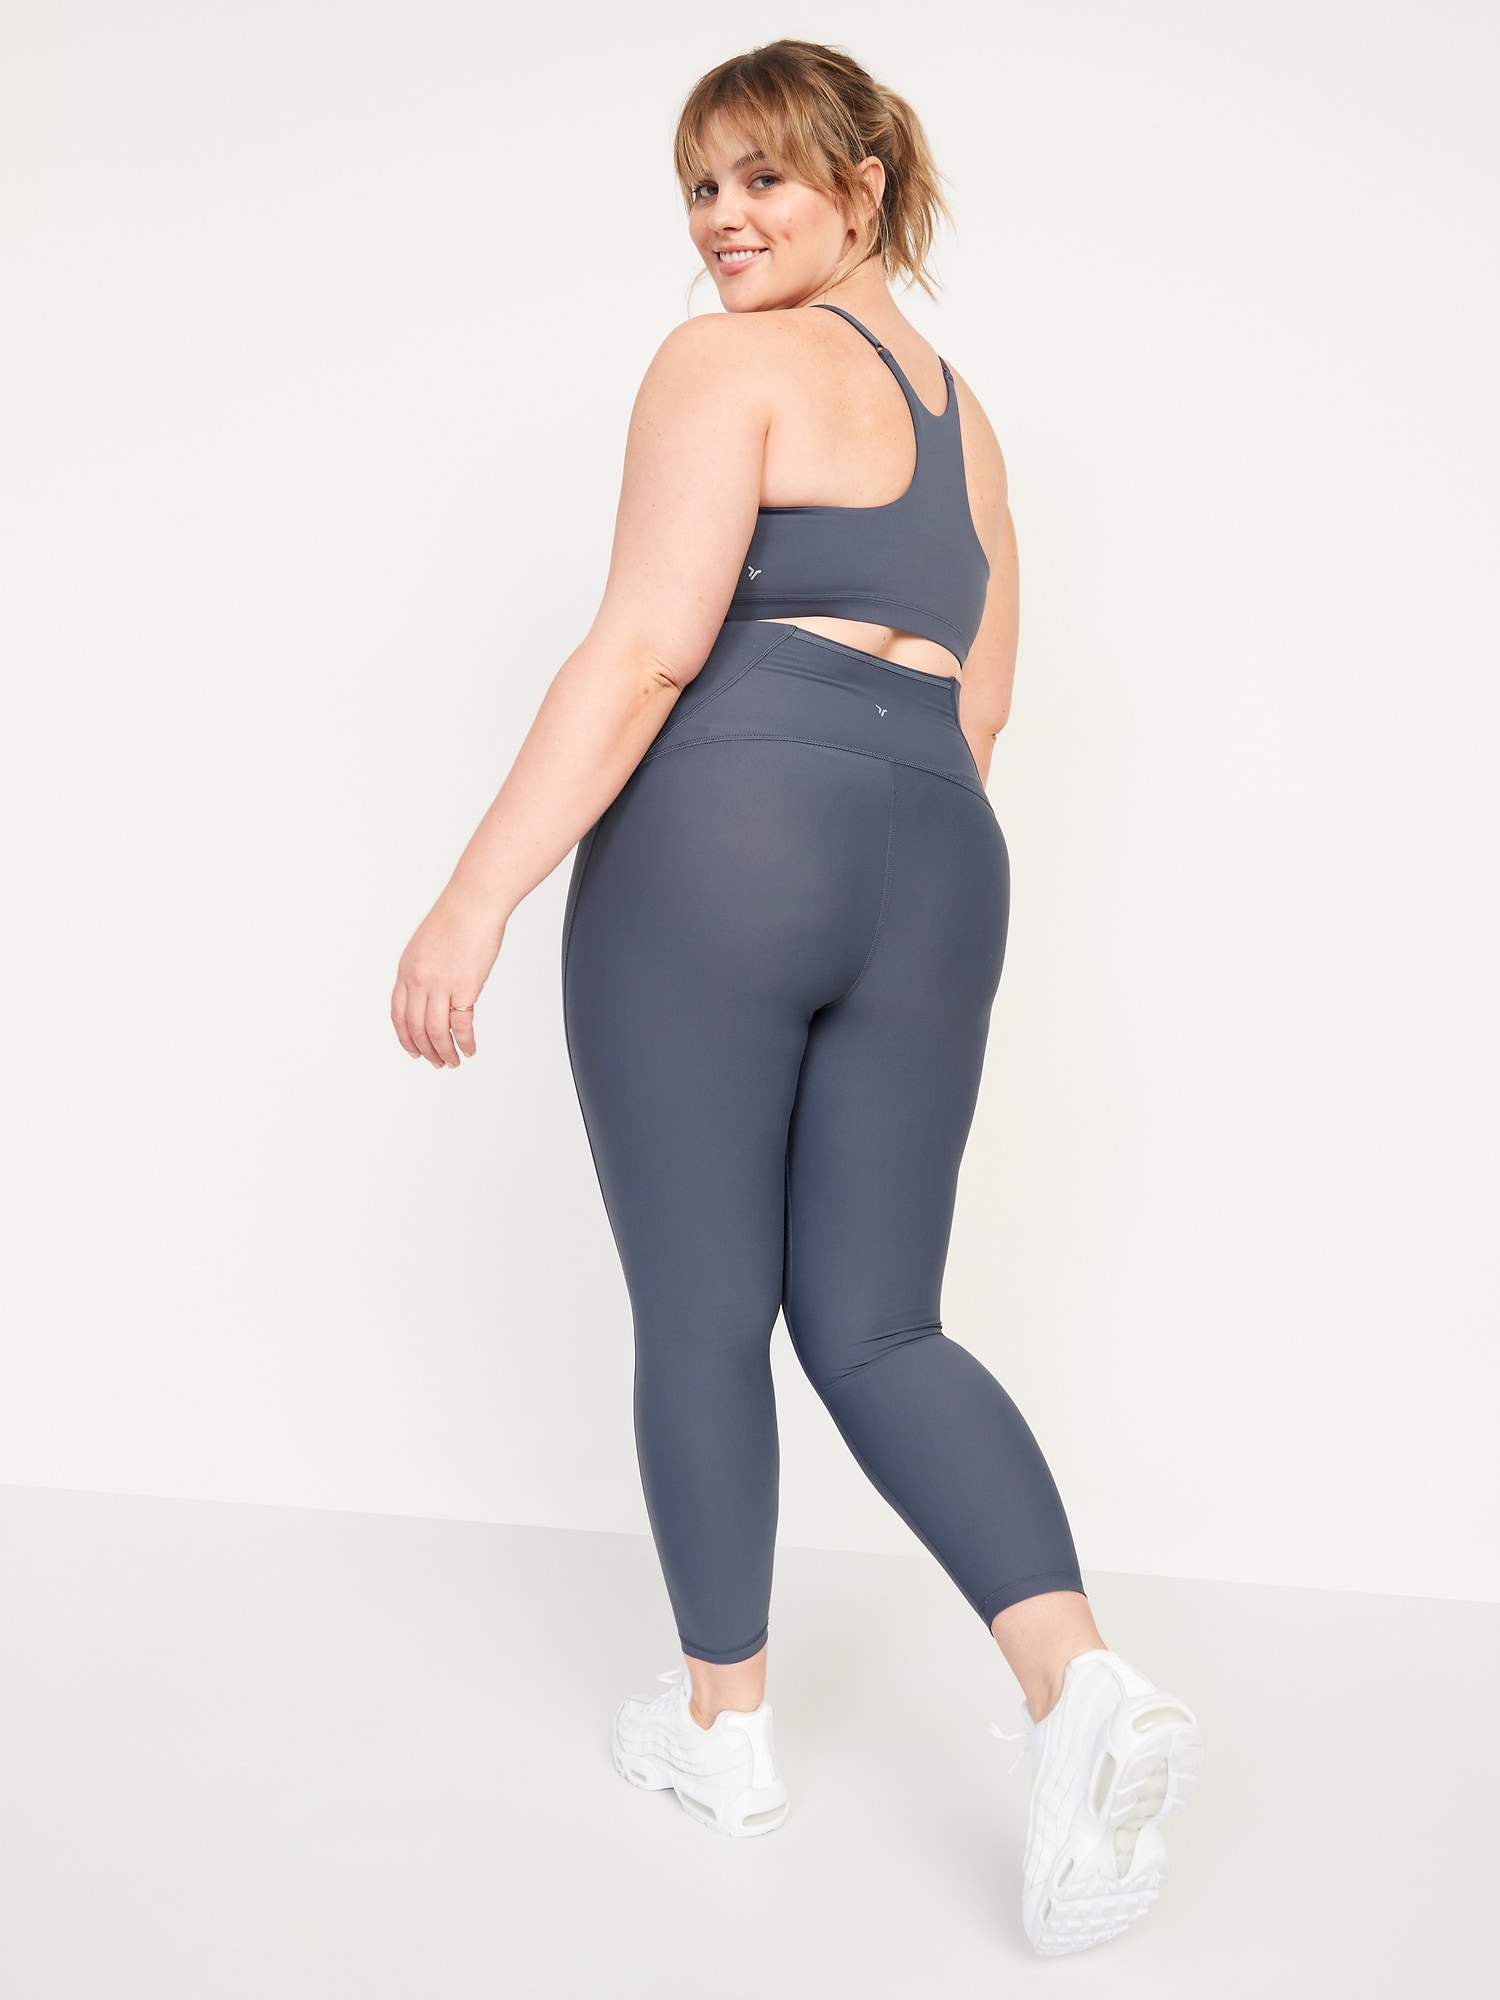 Buy Semantic Leggings - Womens Legging in Black Color - Size Available  (Small, Medium, Large, Extra Large & Double XL) - Cotton Lycra Leggings  Online at Low Prices in India - Paytmmall.com